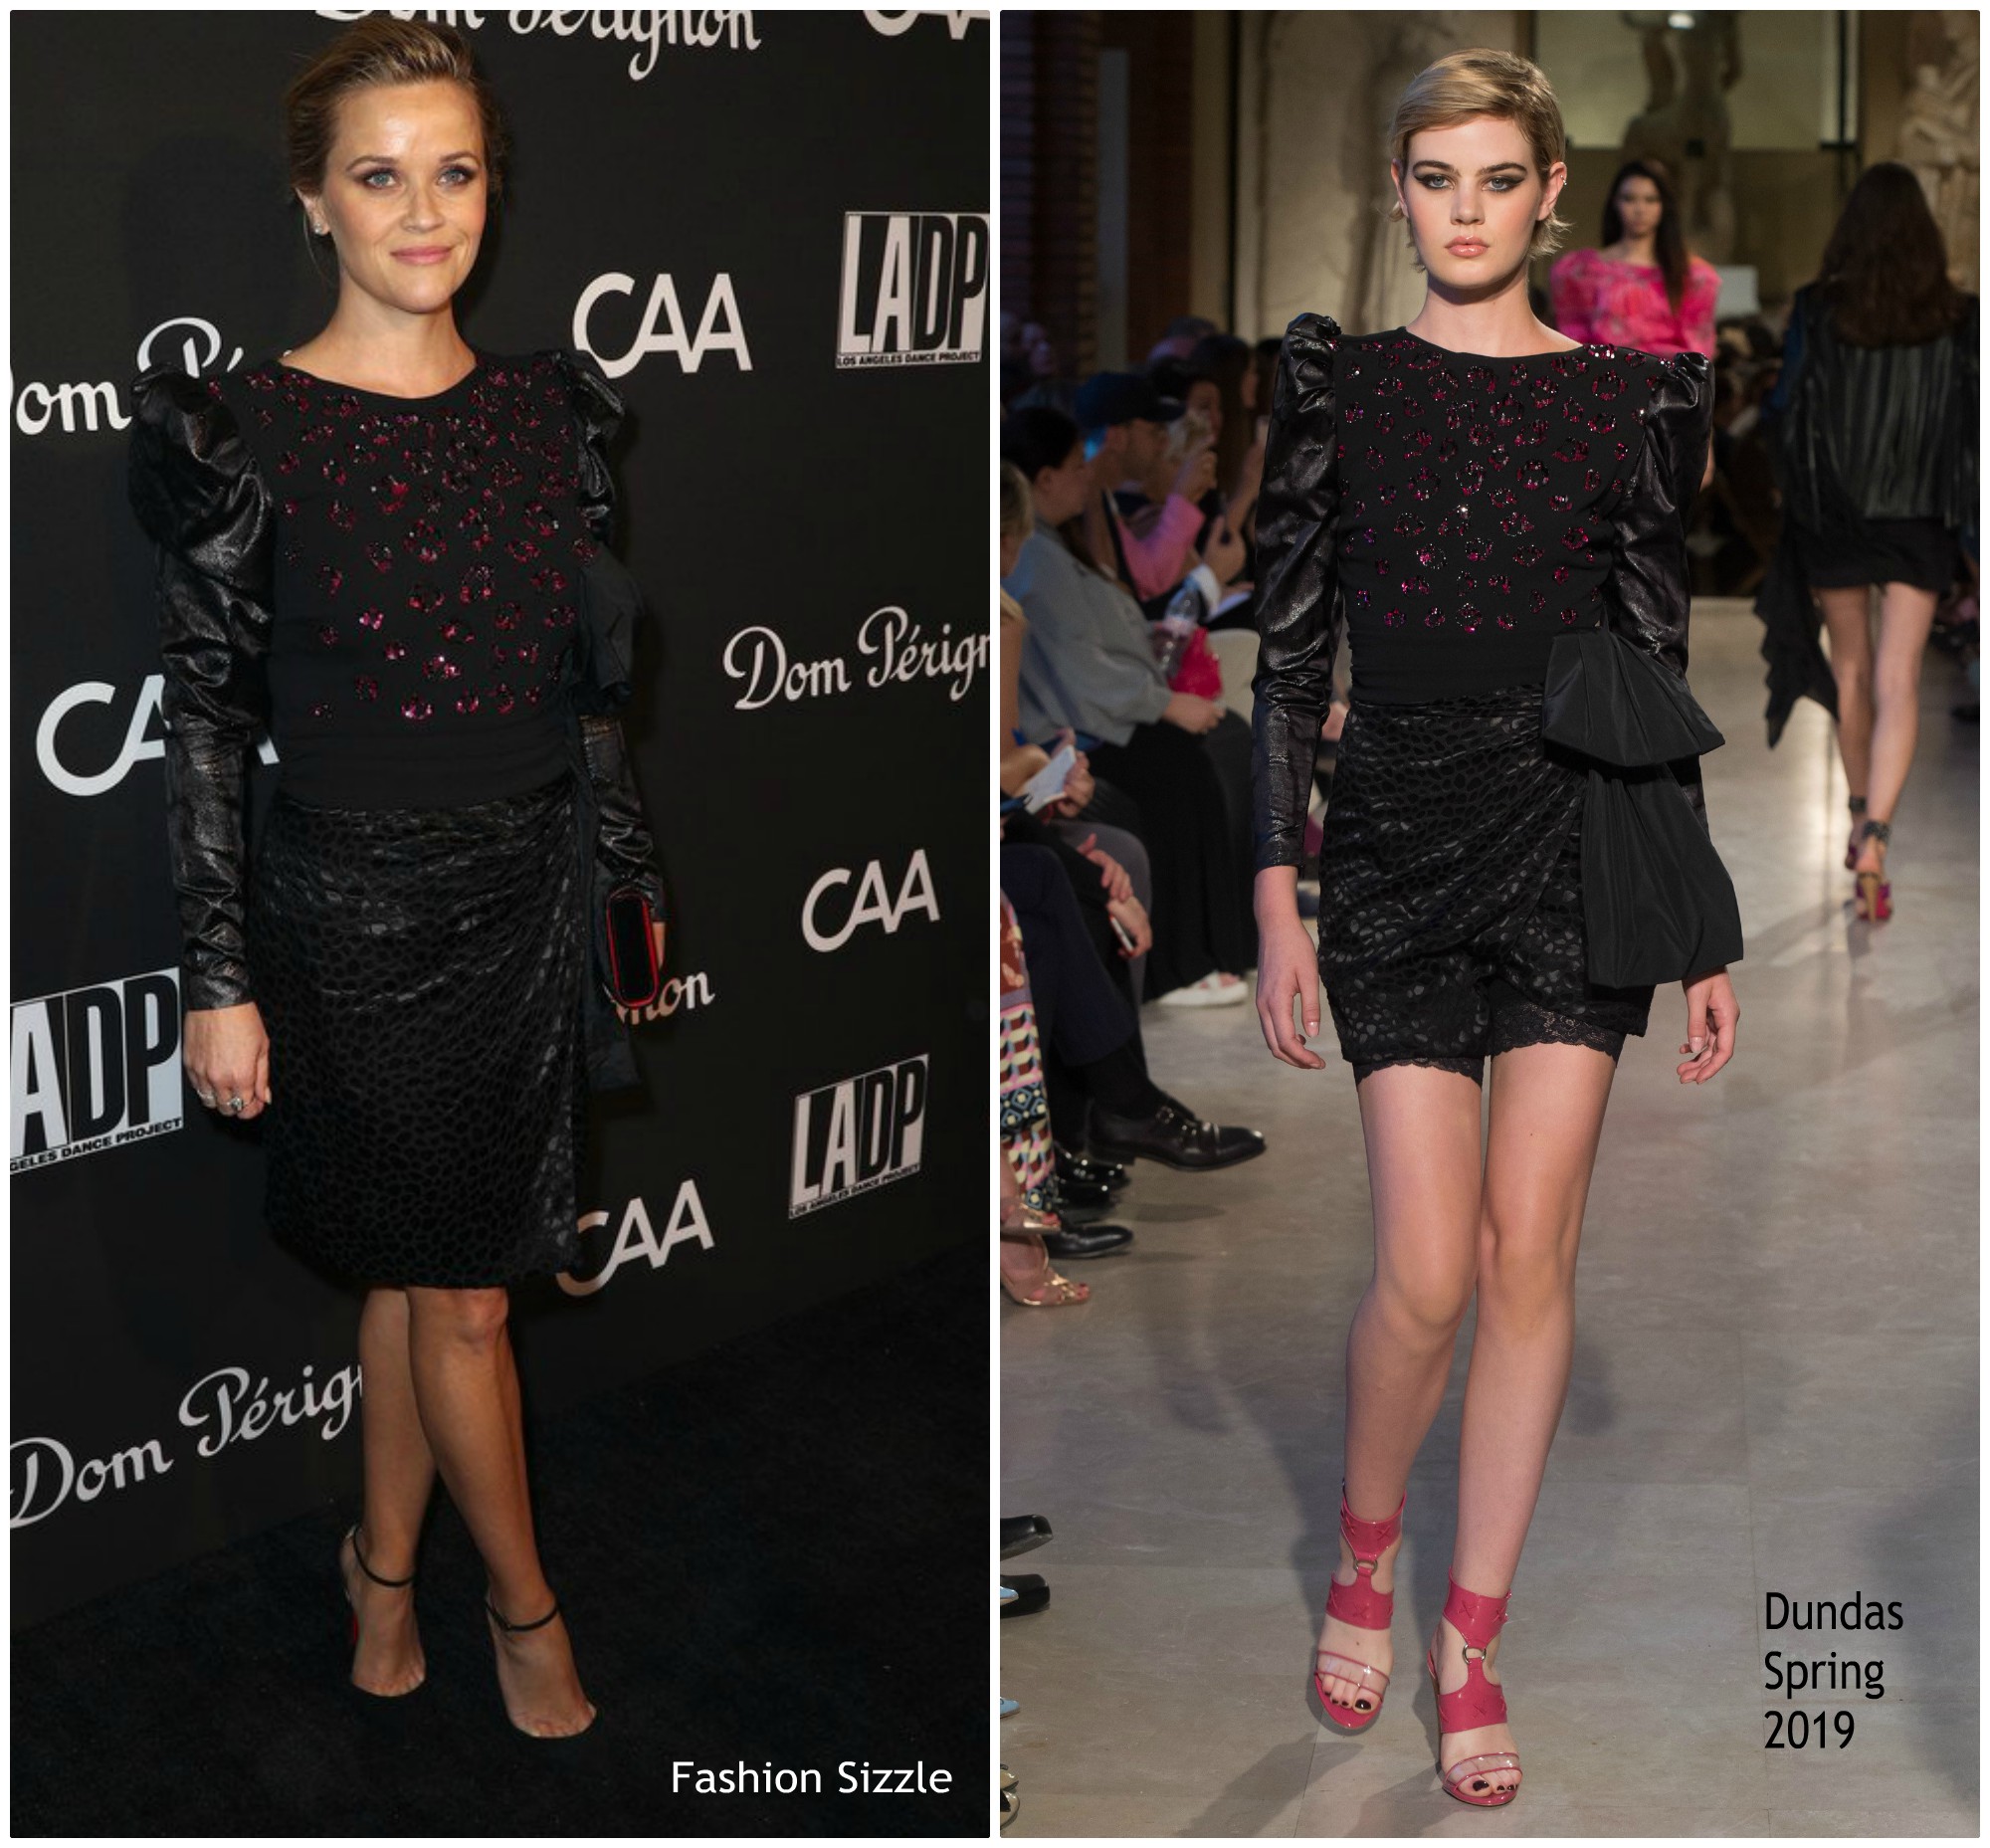 reese-witherspoon-in-dundas-2018-la-dance-projects-annual-gala